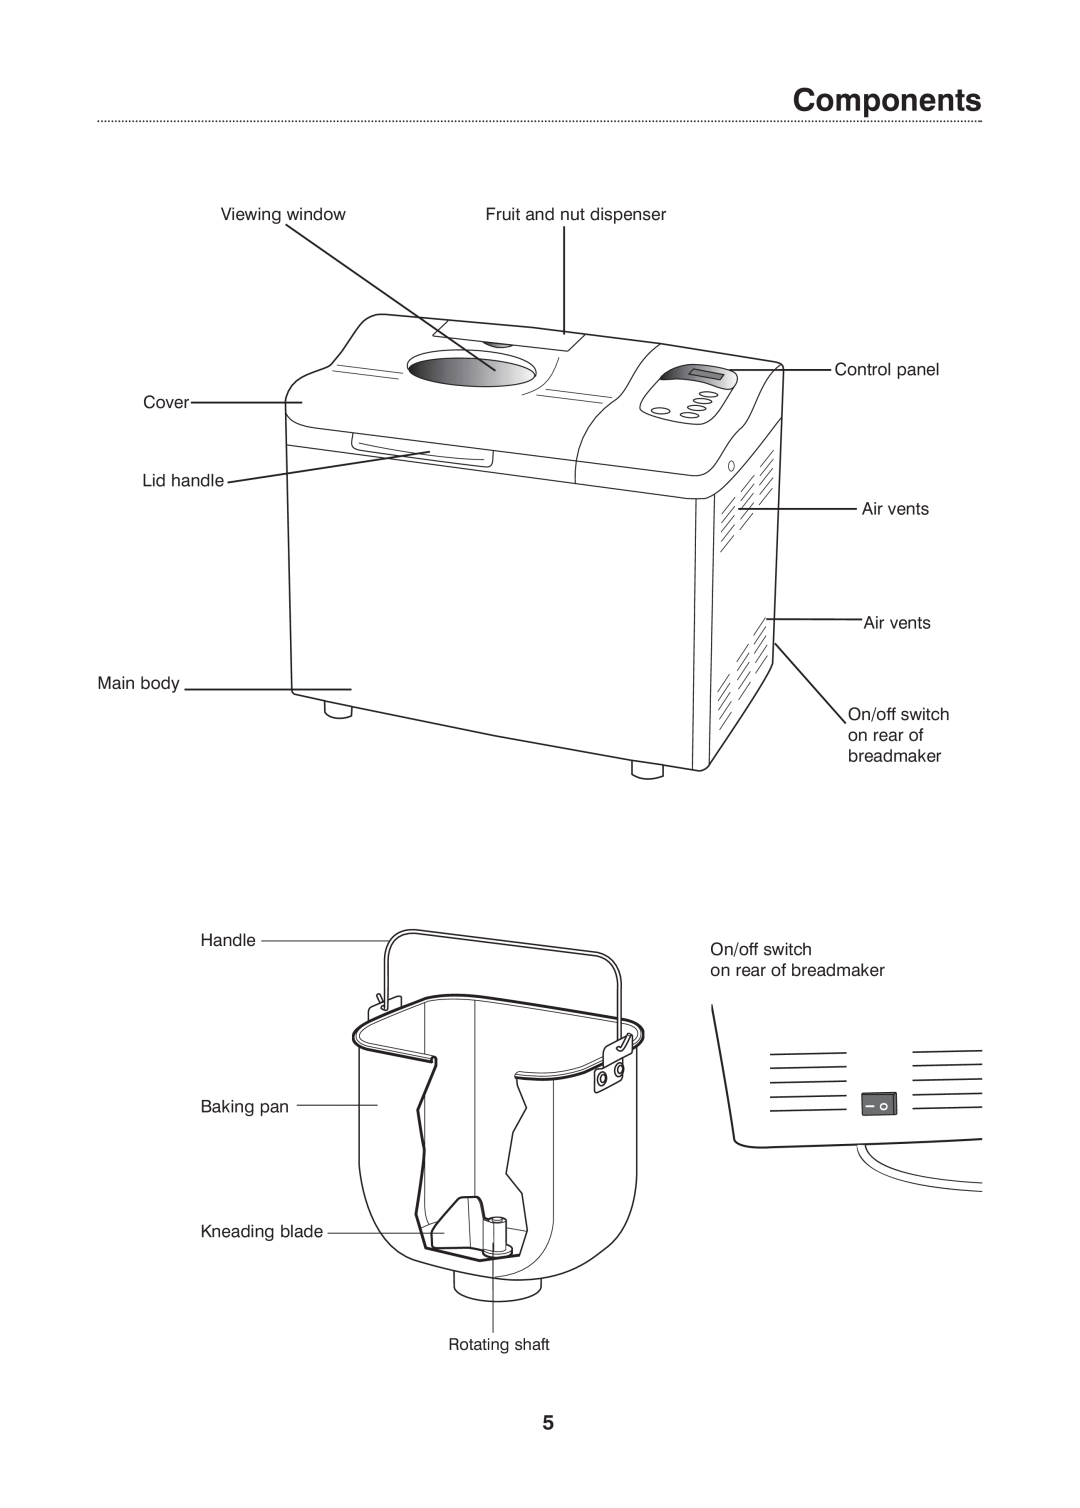 Morphy Richards Fastbake manual Components, Viewing window, Fruit and nut dispenser, On/off switch on rear of breadmaker 